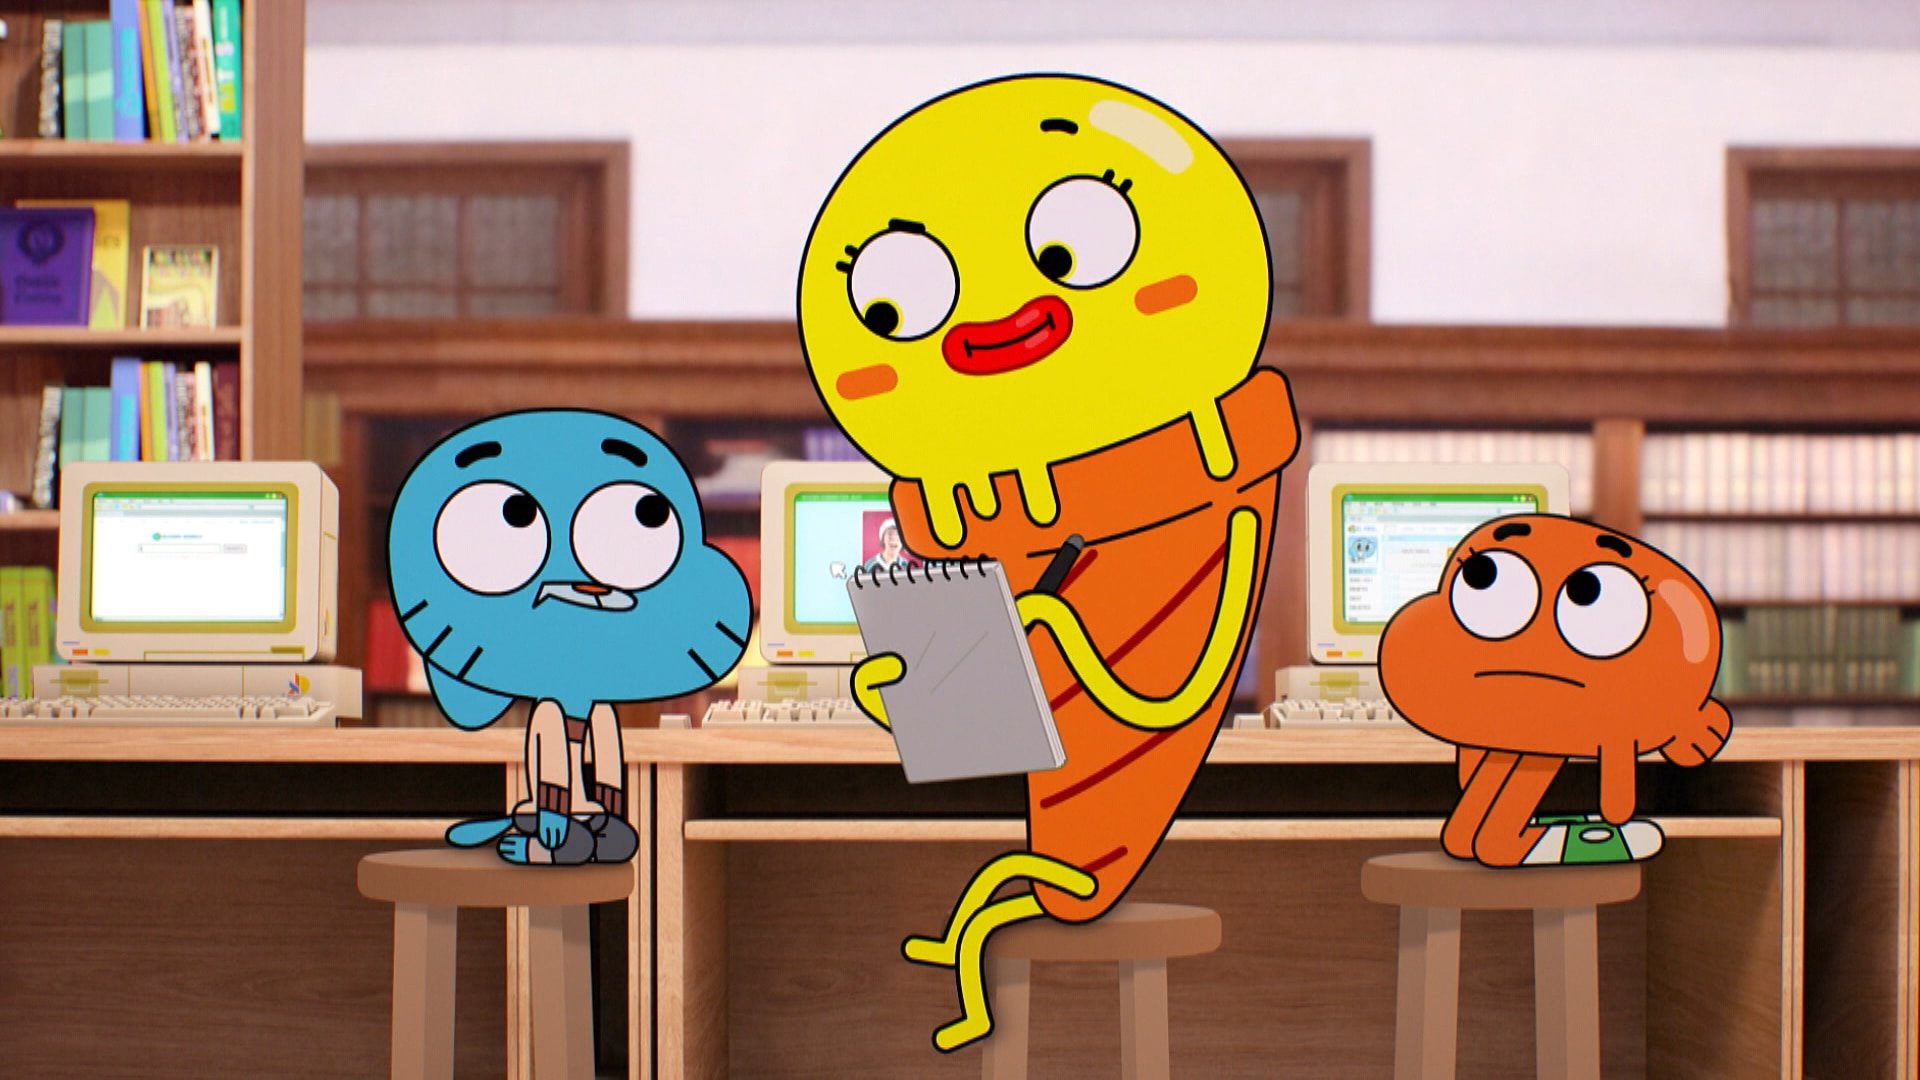 The Amazing World Of Gumball S 5 E 8 The Test / Recap - TV Tropes